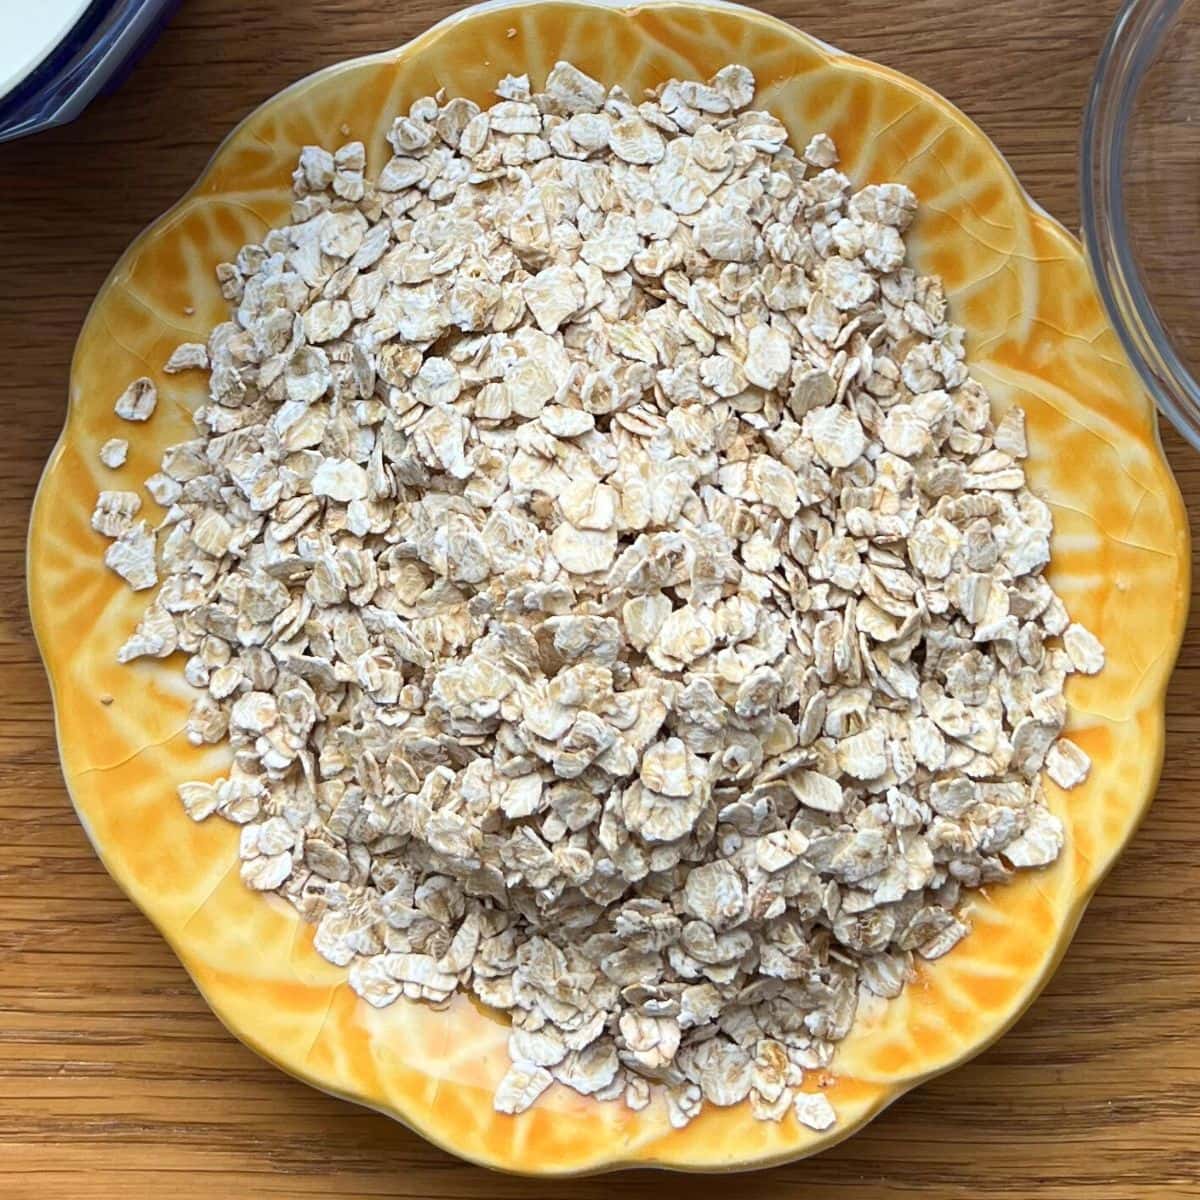 Uncooked oats on small yellow plate.